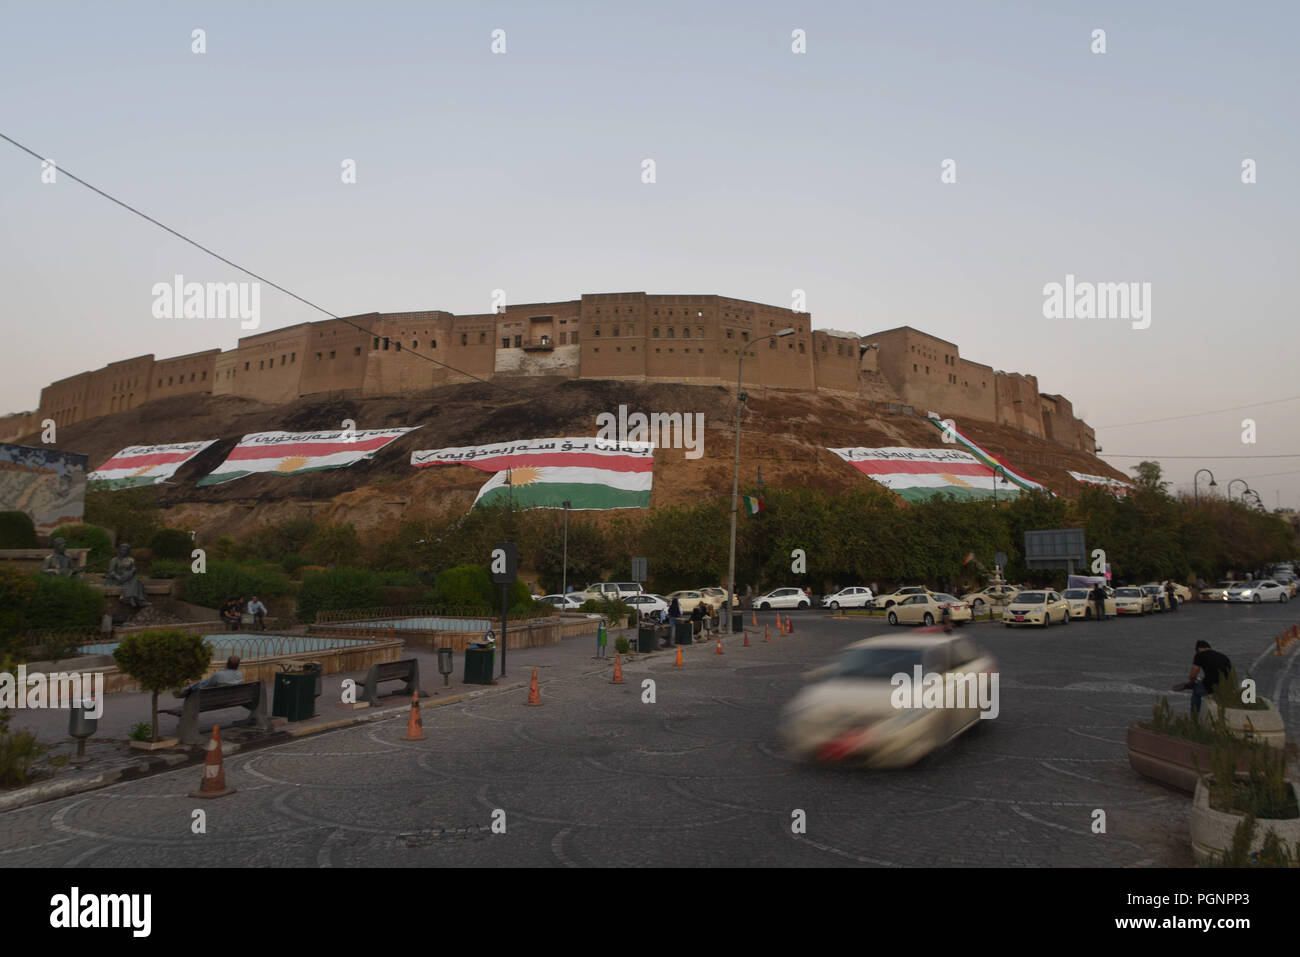 September 27, 2017 - Erbil, Kurdistan: A view of the ancient Erbil citadel adorned with Kurdish flags. The Iraqi Kurdish electoral commission declared that more than 92 percent of voters backed independence from Iraq in a historic referendum.  Ambiance dans les rues d'Erbil apres le referendum sur l'independance du Kurdistan irakien. *** FRANCE OUT / NO SALES TO FRENCH MEDIA *** Stock Photo